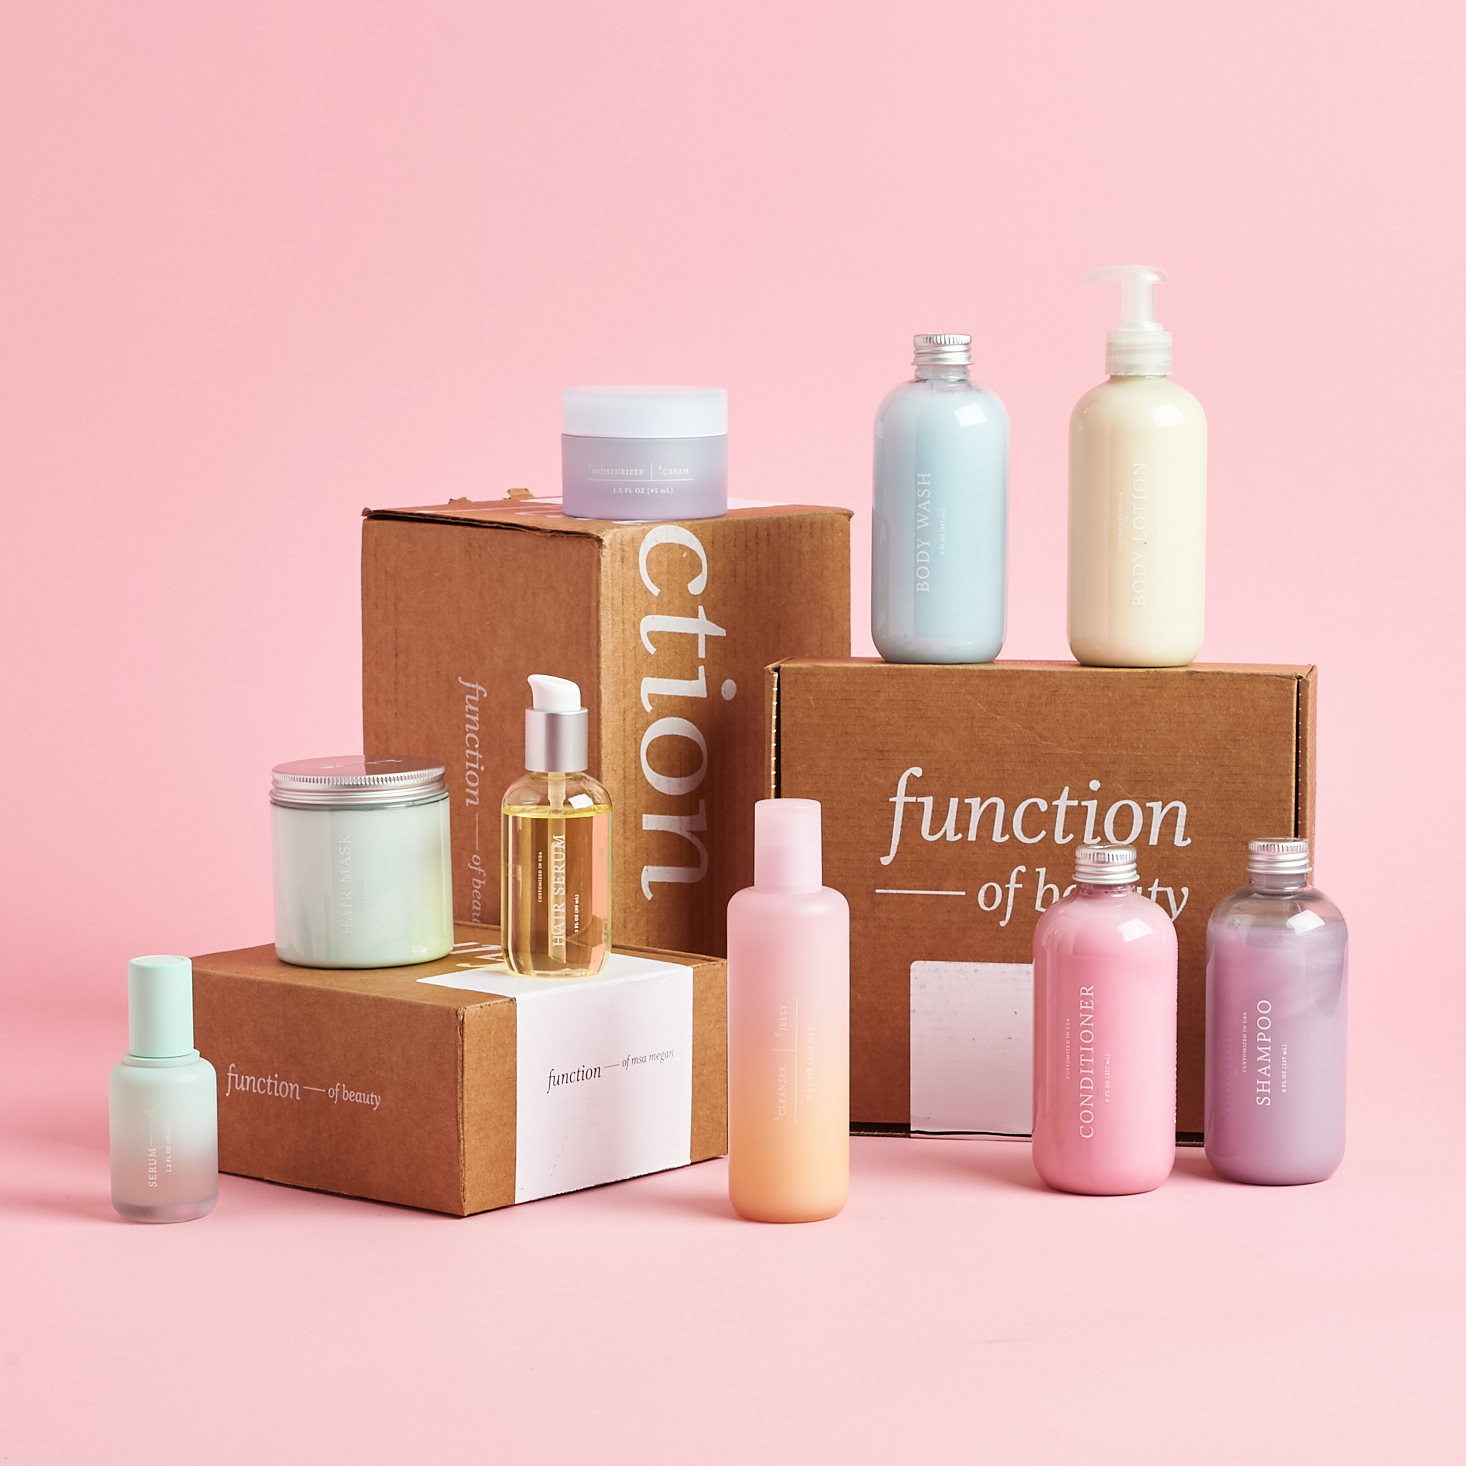 Meet Function of Beauty, the Company Changing the Hair Care Industry